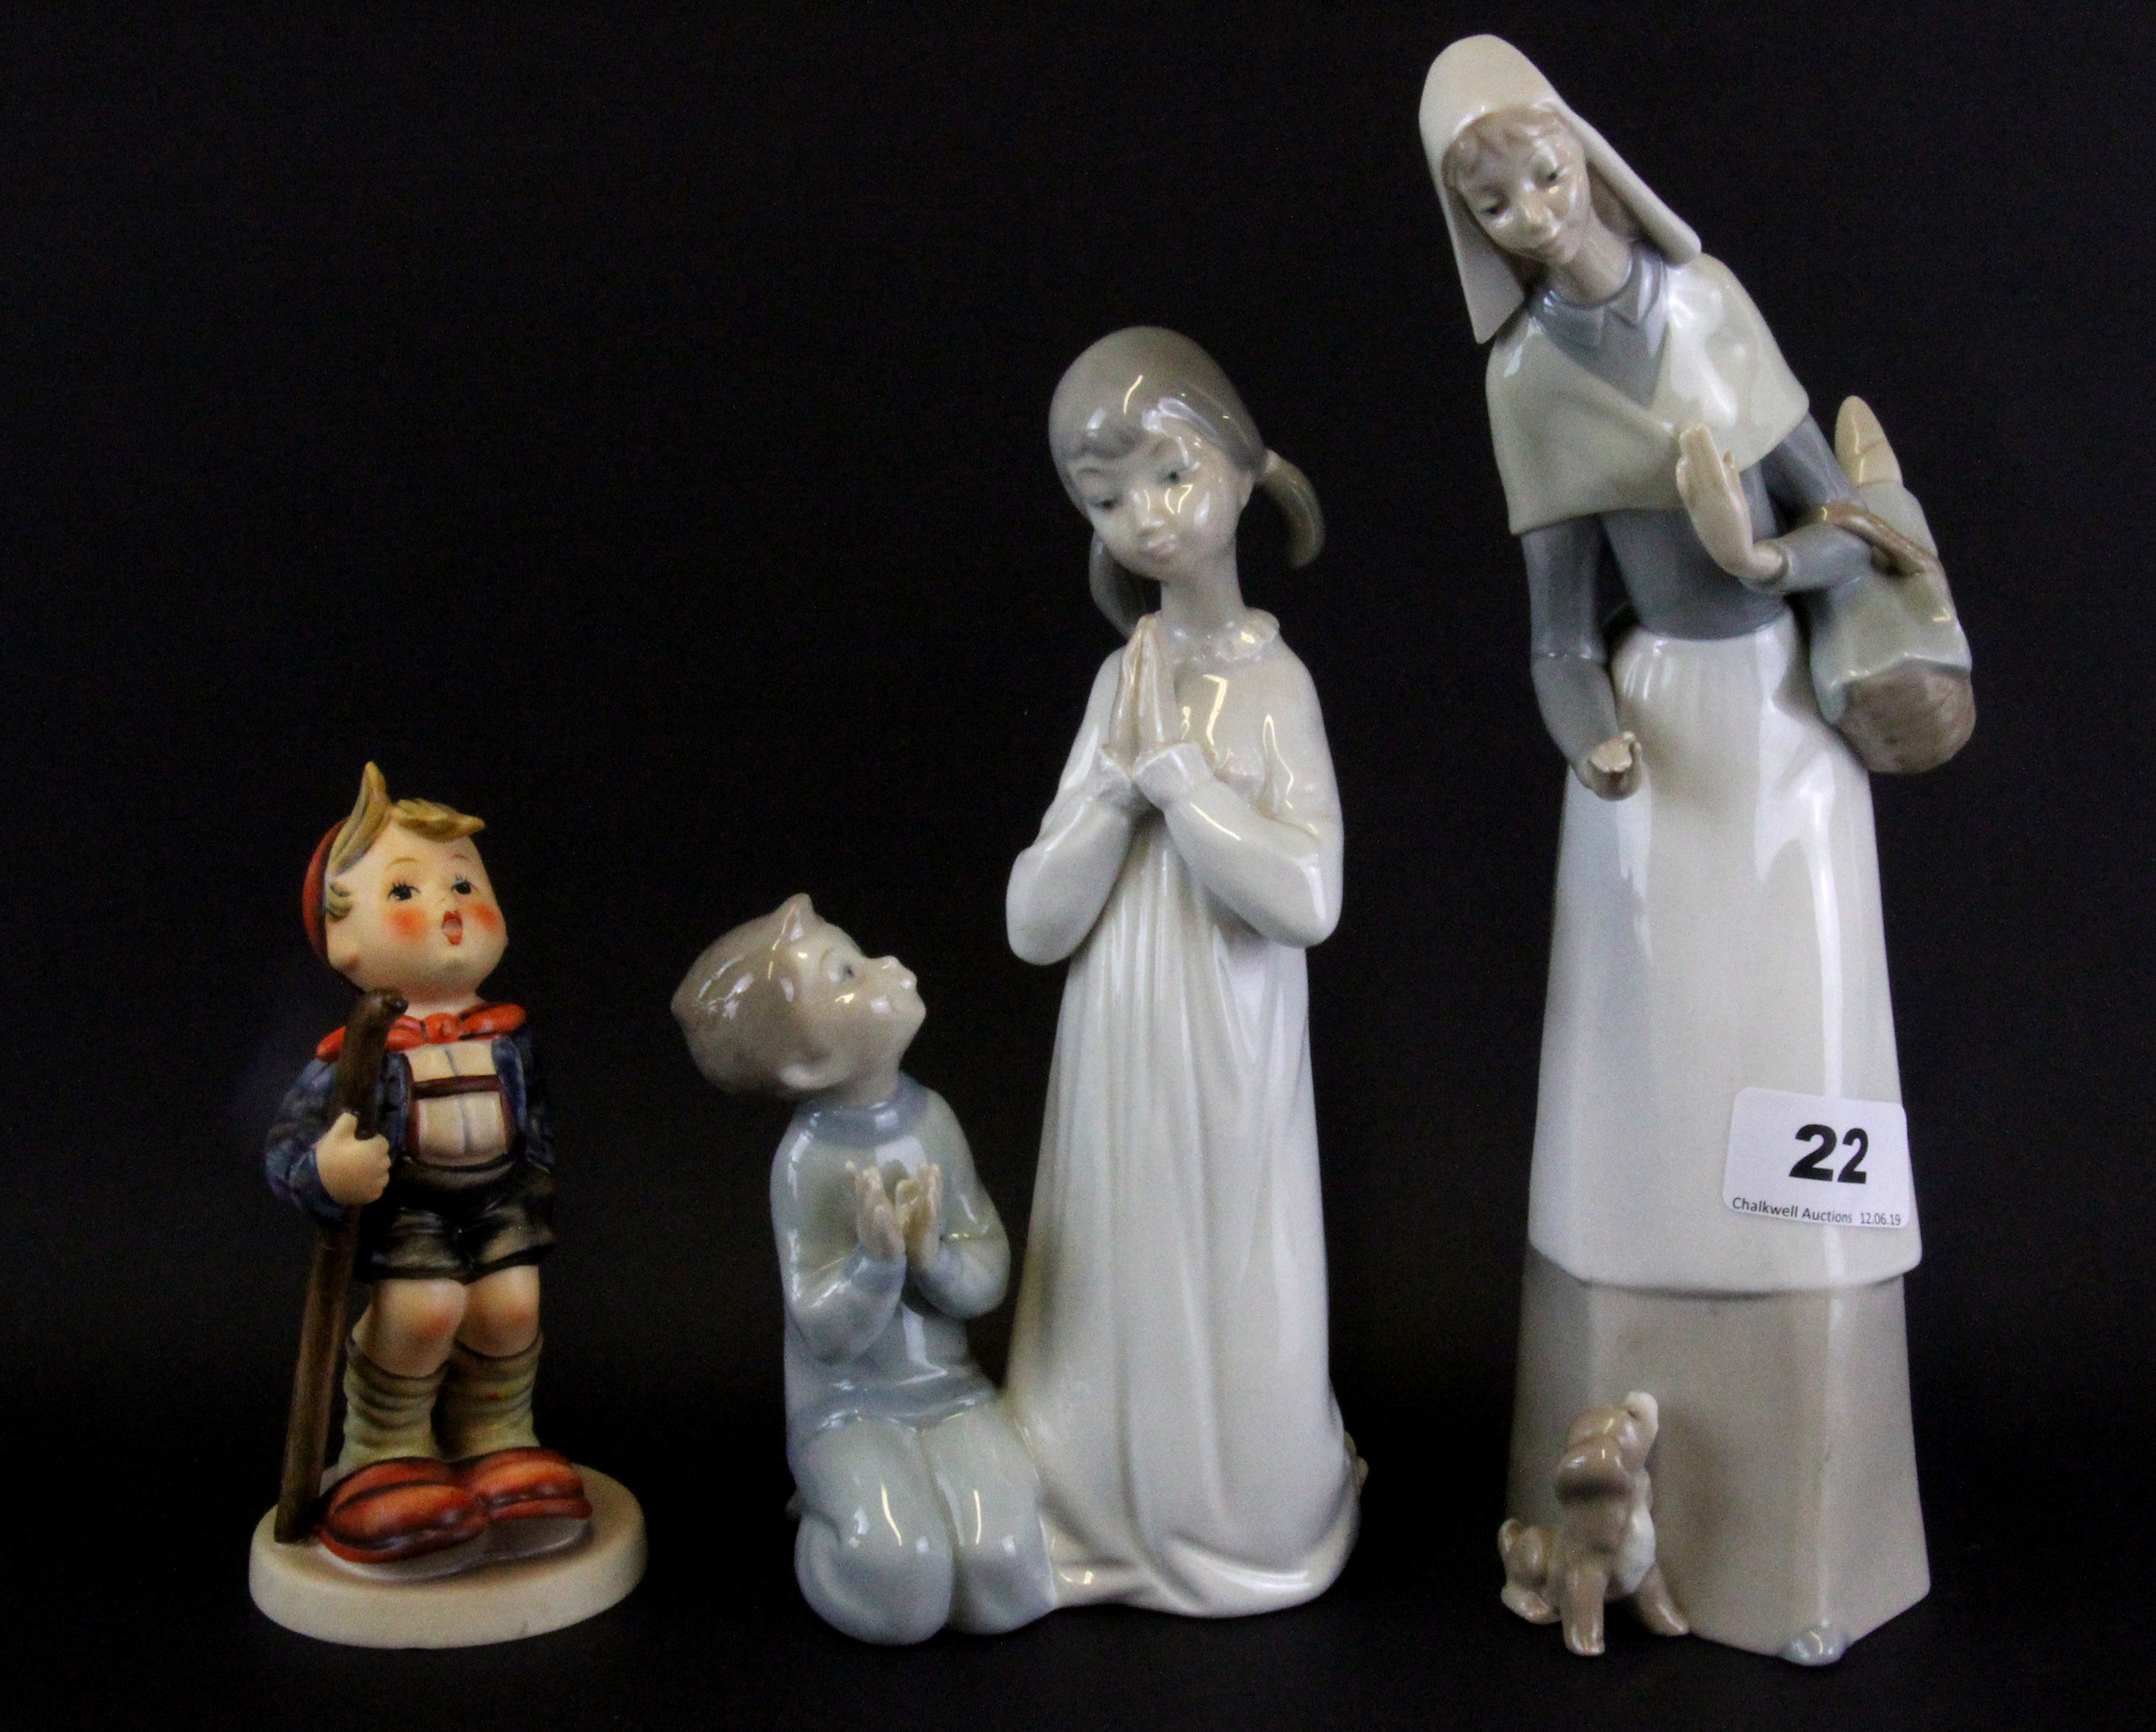 A Lladro porcelain figure of a girl with a puppy, together with a Lladro porcelain figure of a